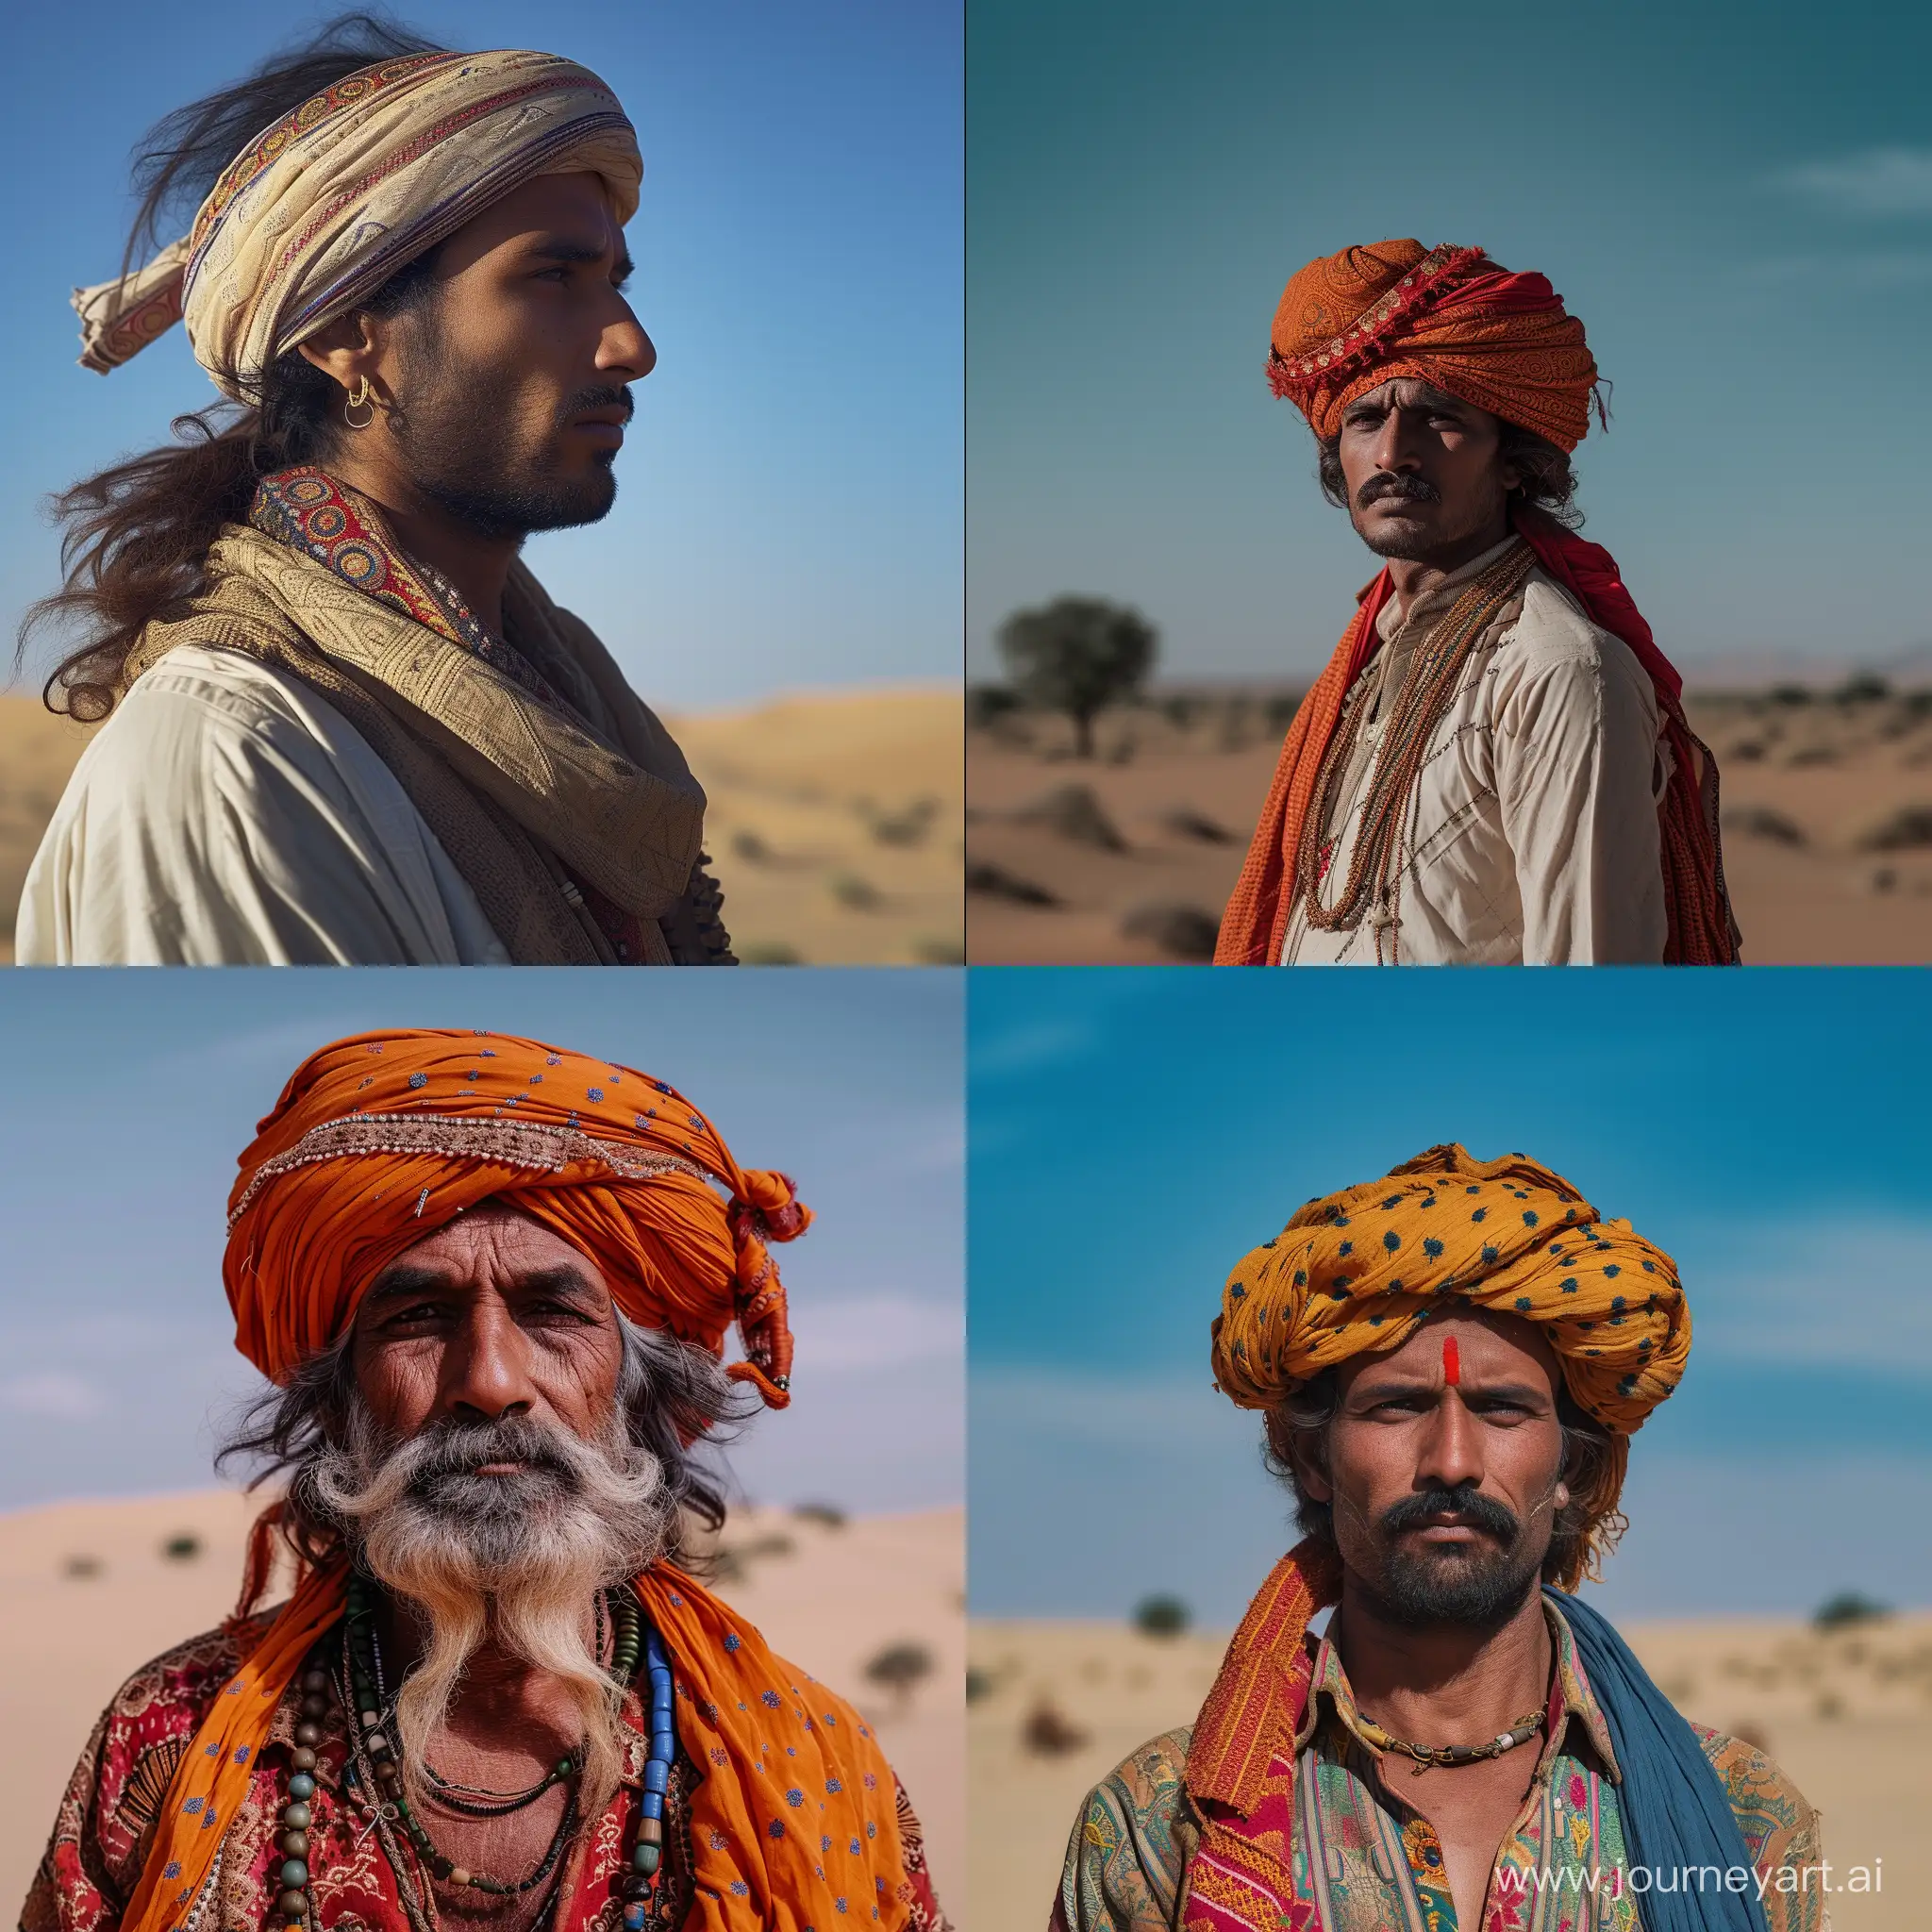 Jat-Tribe-Members-in-India-HalfBody-Portraits-with-Soft-Light-and-Contrast-Desert-Backdrop-under-a-Vibrant-Blue-Sky